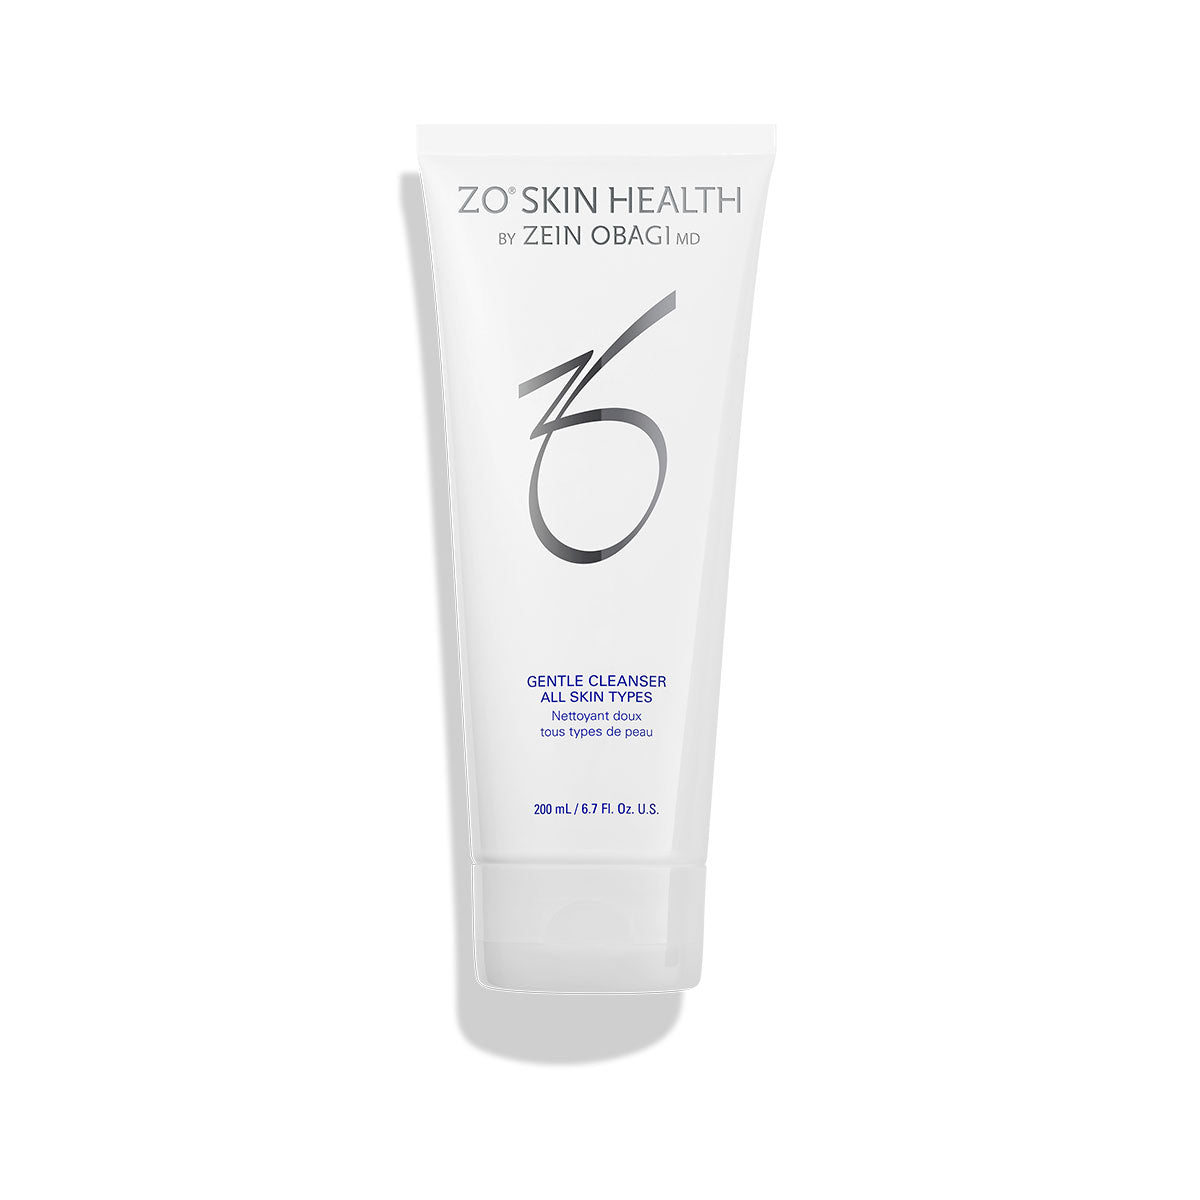 zo skin health gentle cleanser face wash for all skin types skincare